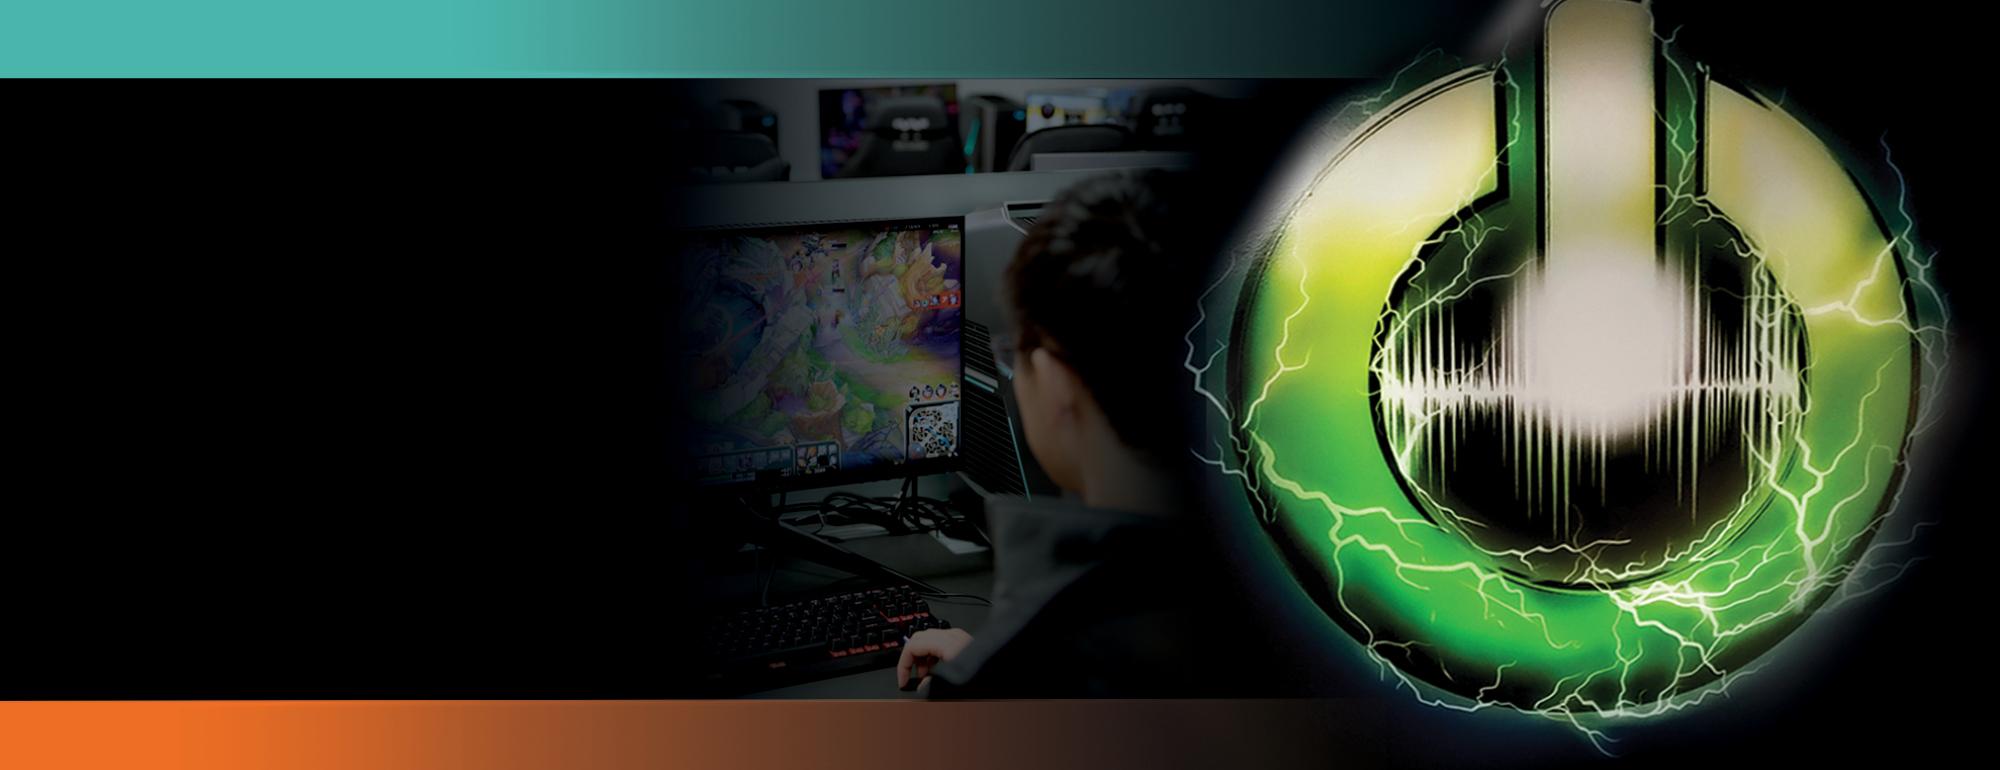 Graphic with green glowing power logo with student playing a PC game in the background